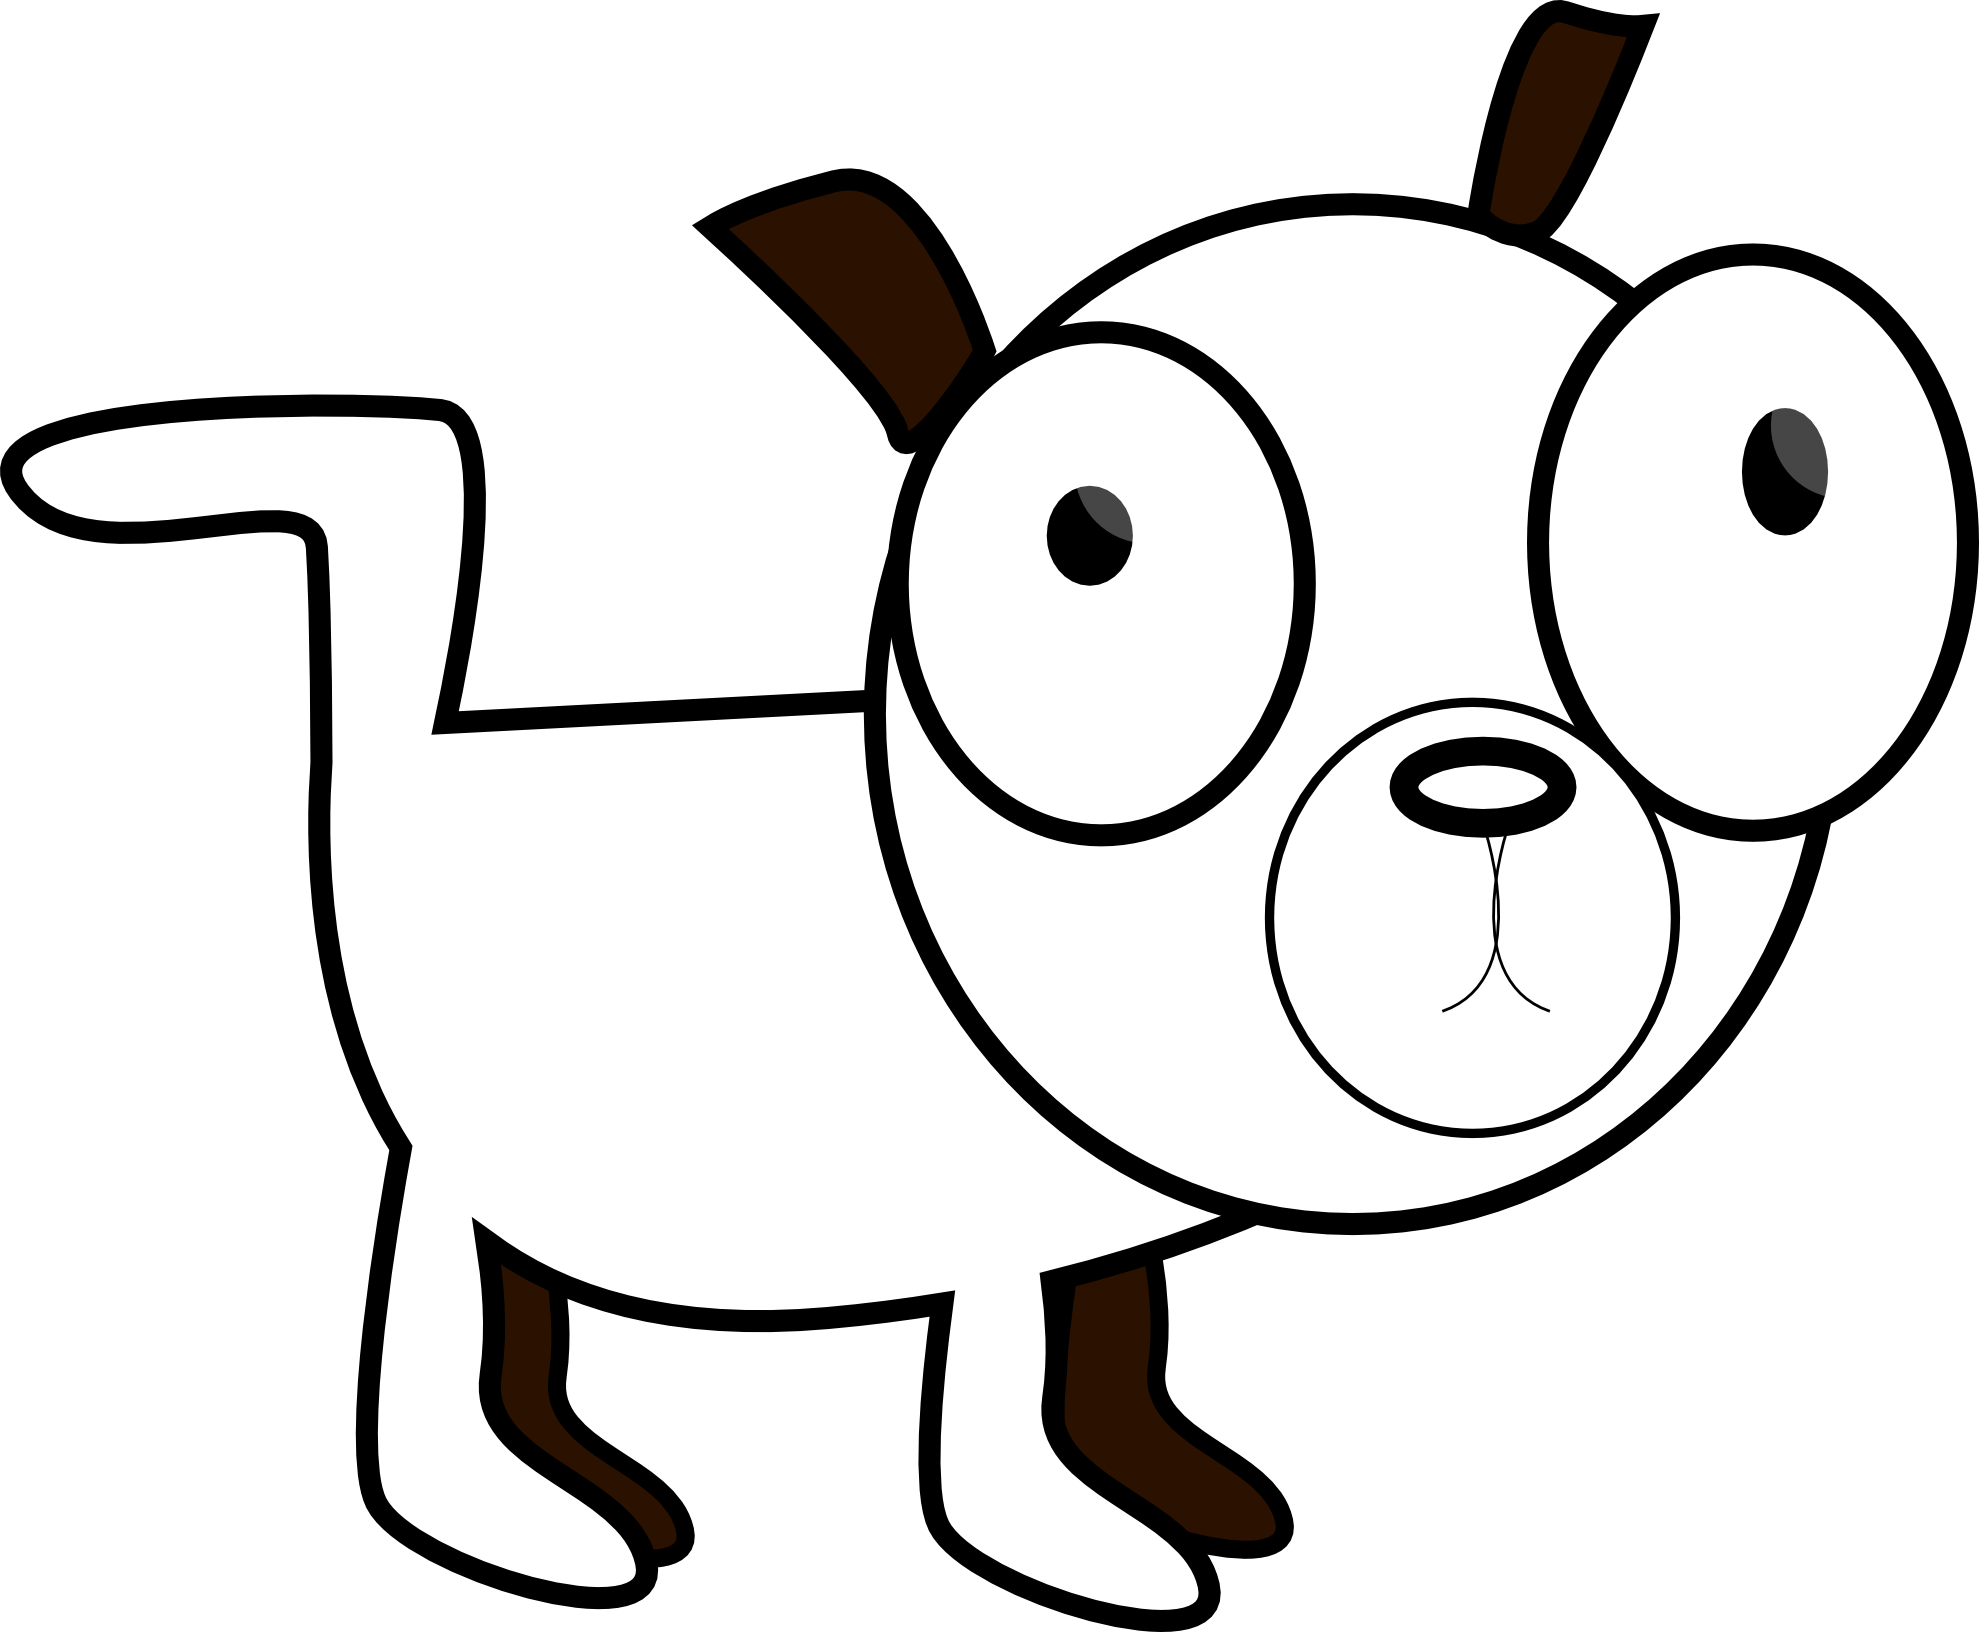 pup-png-black-and-white-transparent-pup-black-and-white-png-images